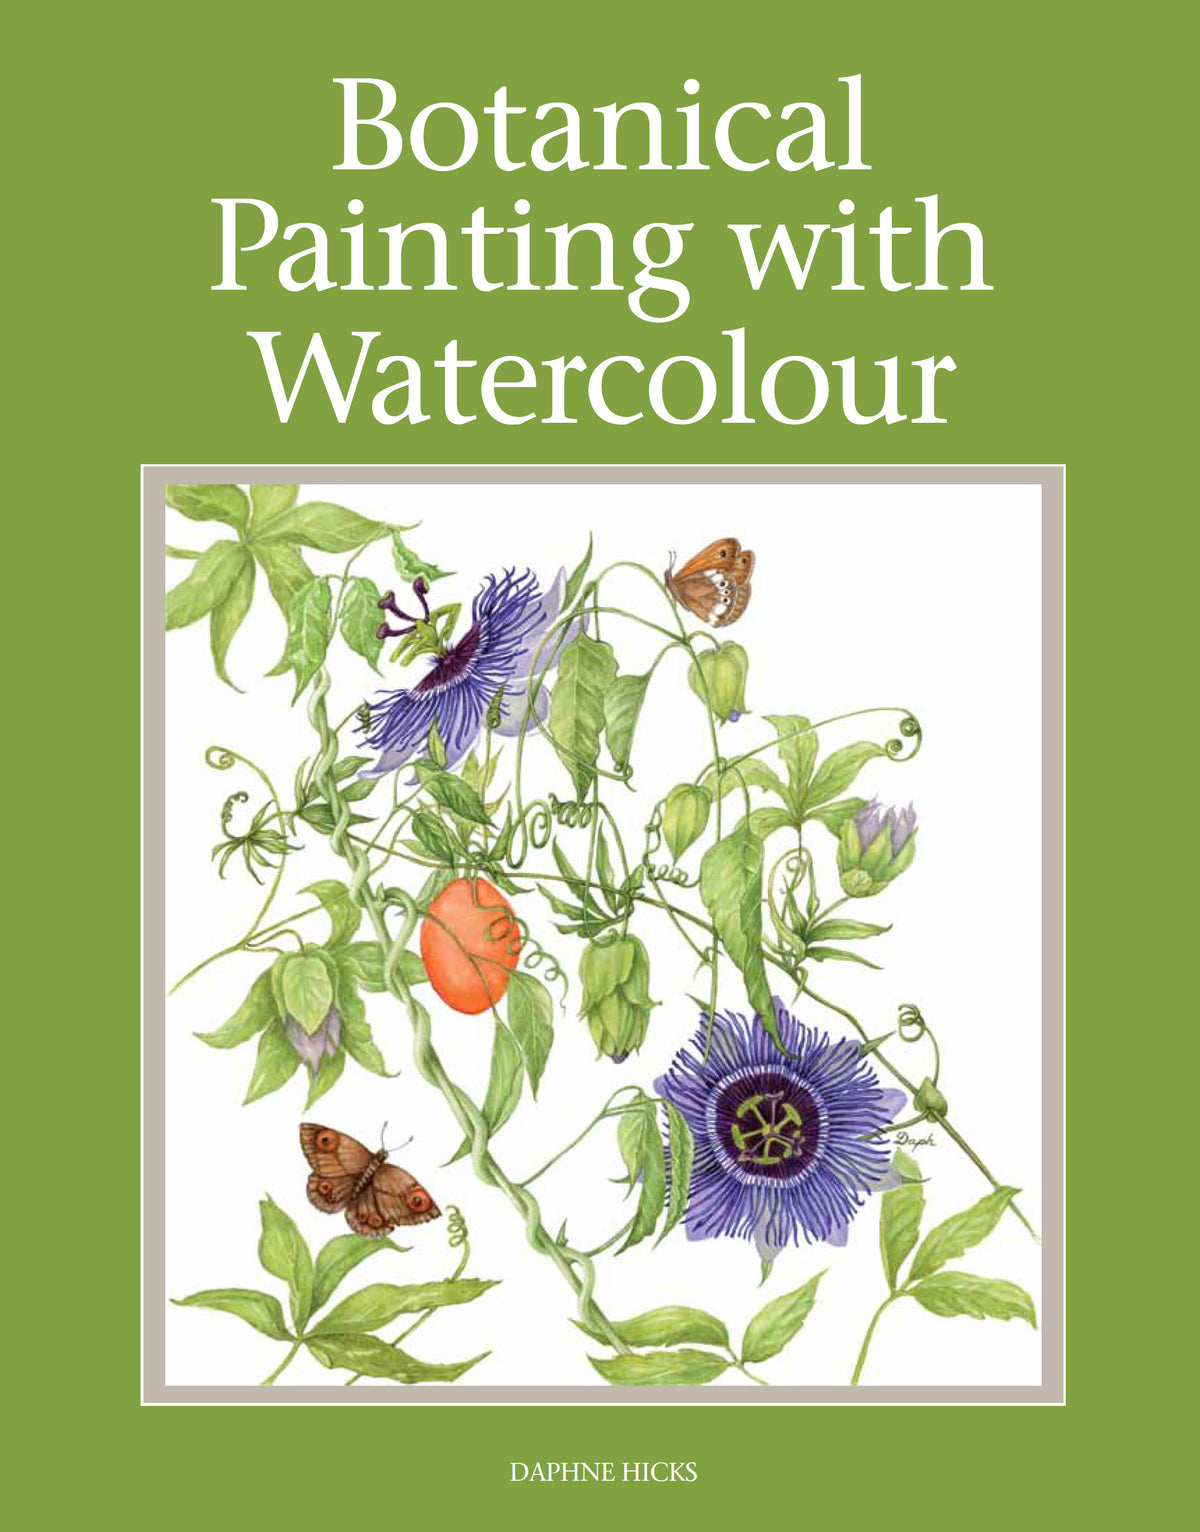 Botanical Painting with Watercolour